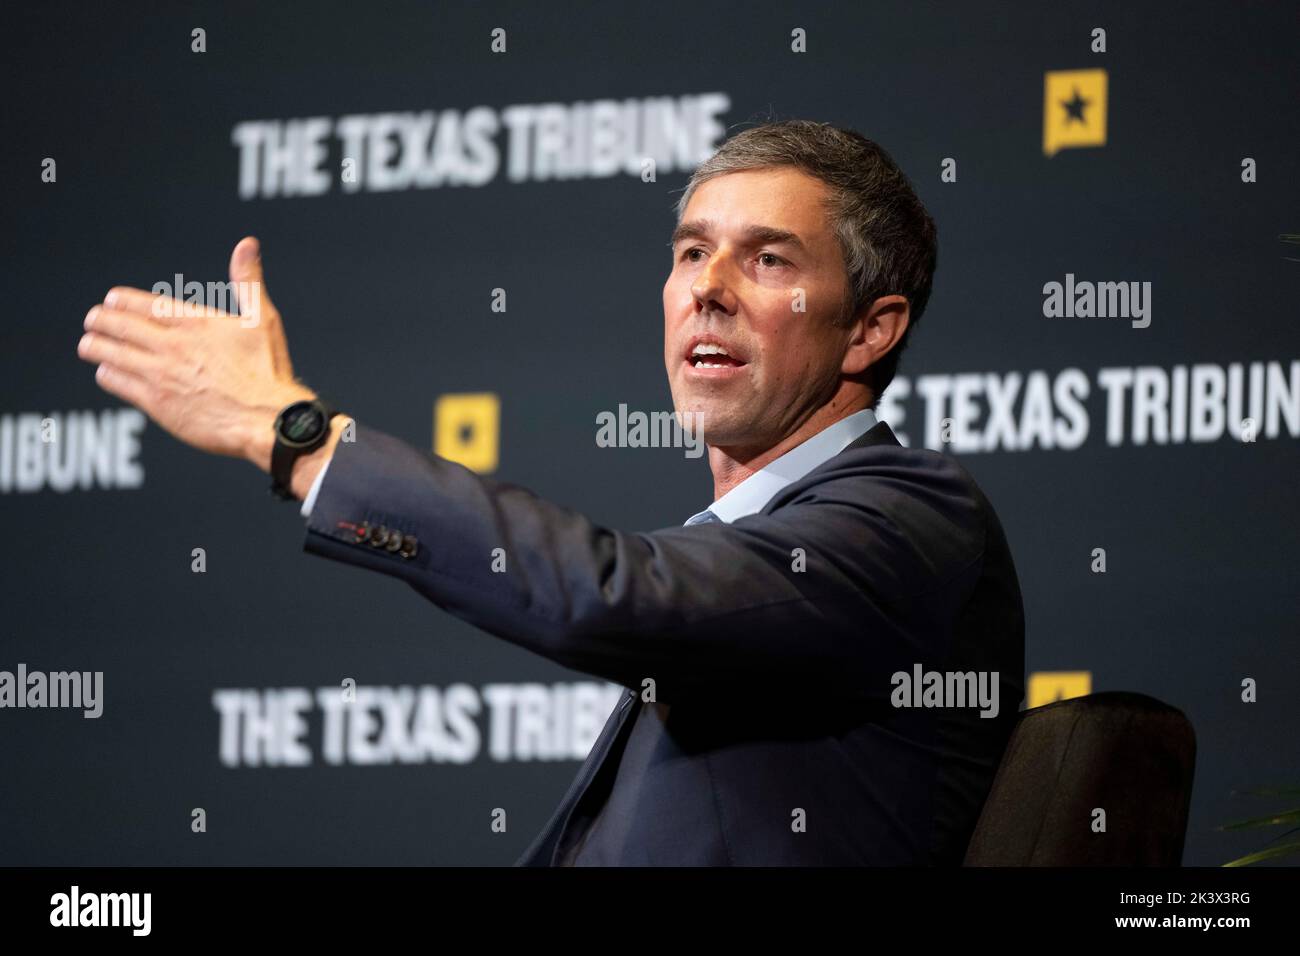 Austin Texas USA, September 24 2022: Democratic nominee for governor of Texas BETO O'ROURKE speaks during an interview session at the annual Texas Tribune Festival in downtown Austin. O'Rourke is a former congressman from El Paso. Stock Photo